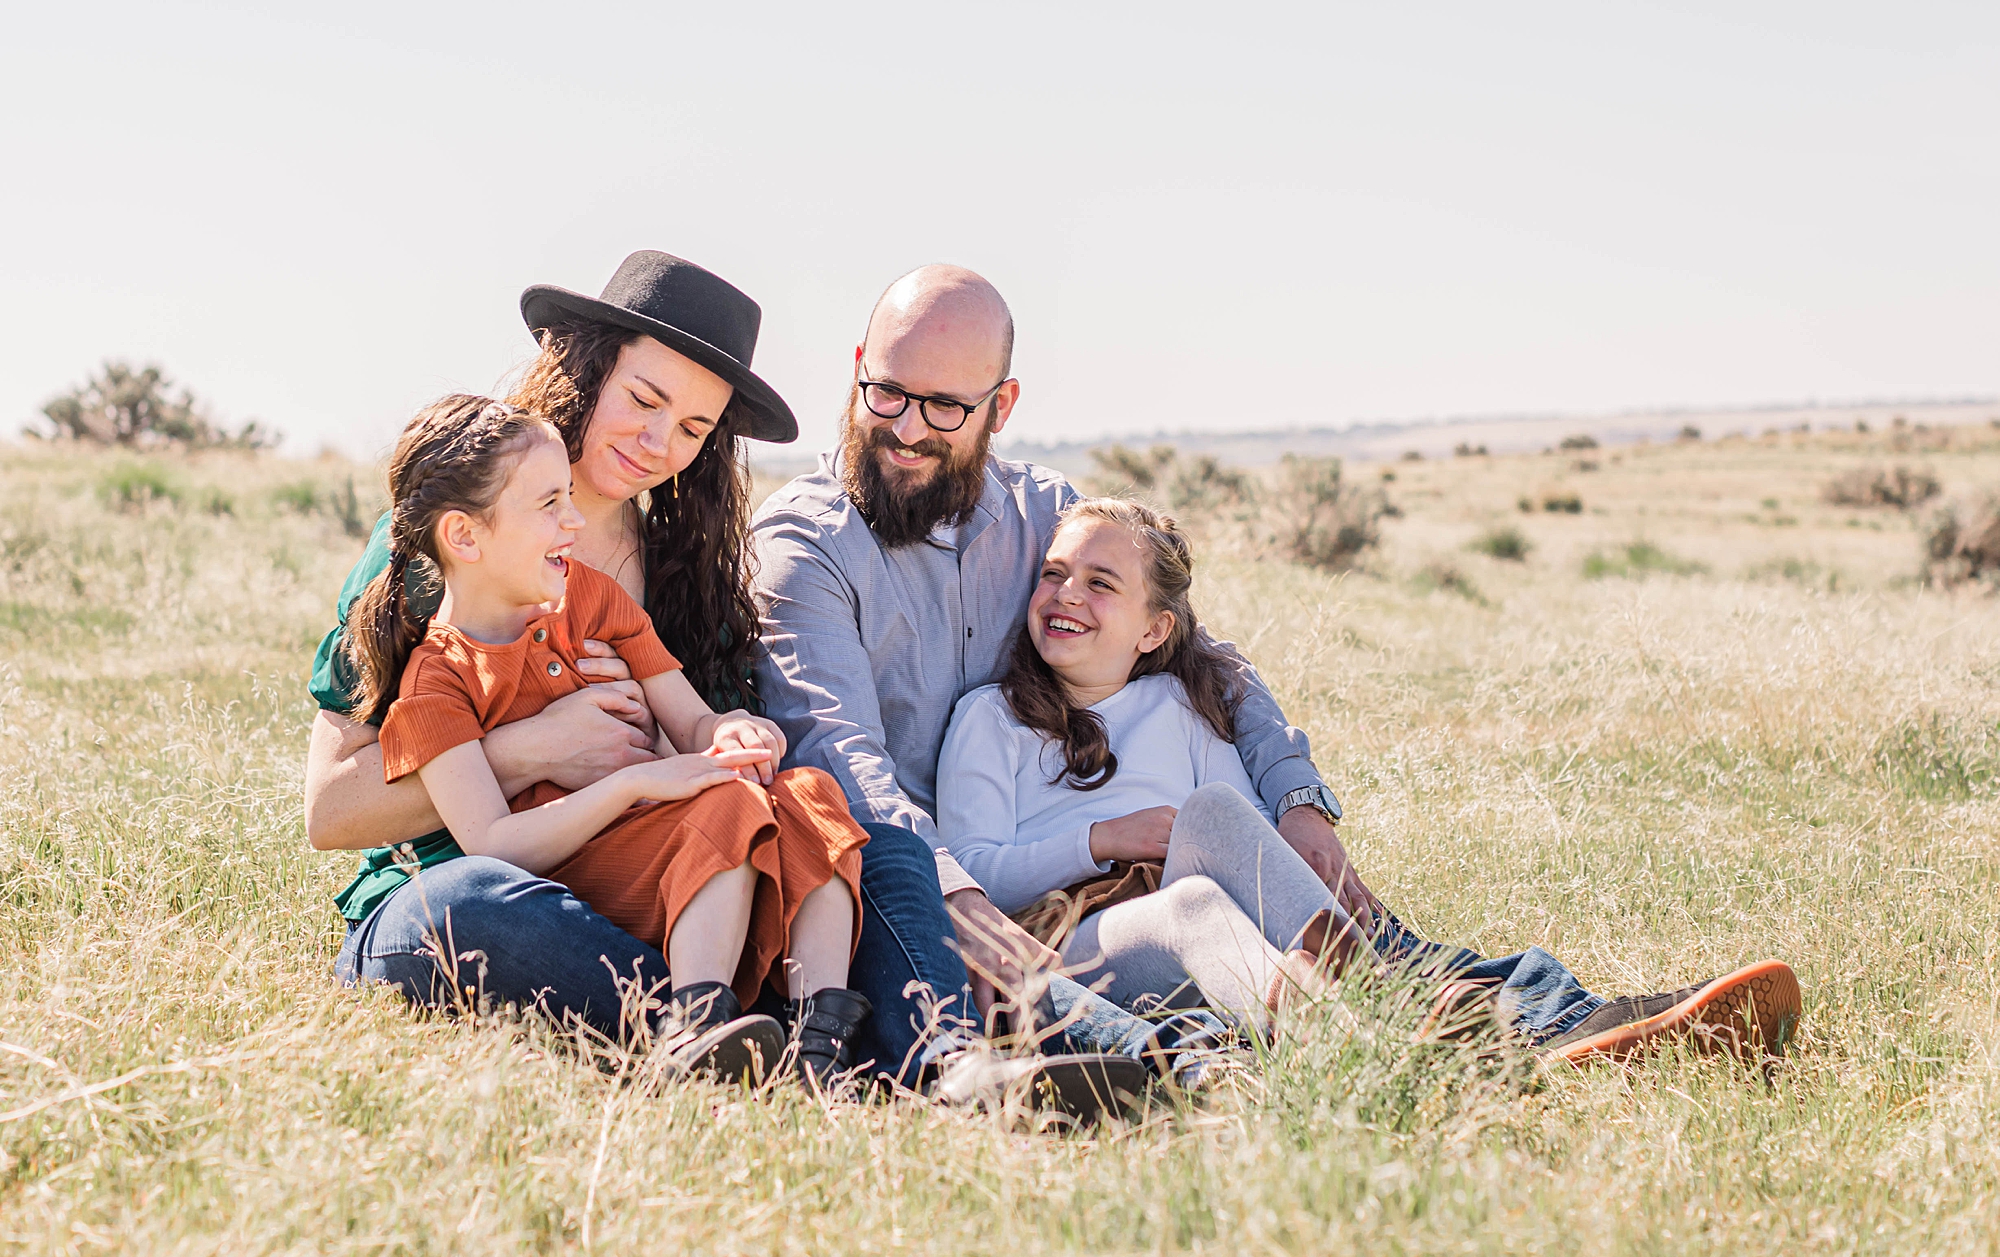 Candid family portraits by PNW family photography team, Lee & Dixon Studios